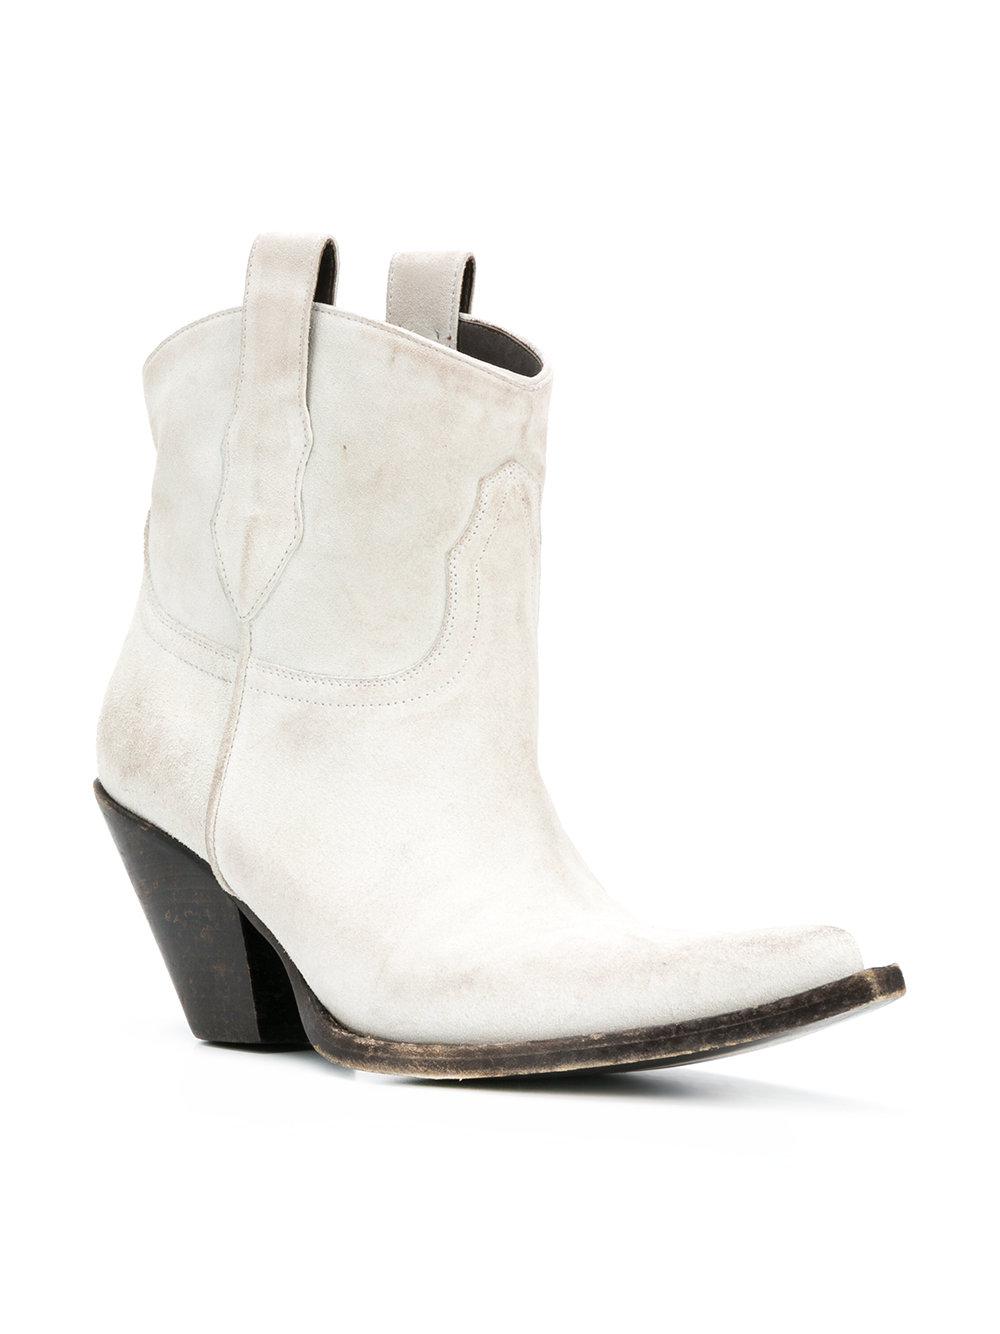 Maison Margiela Leather Mid-calf Western Boots in White - Lyst